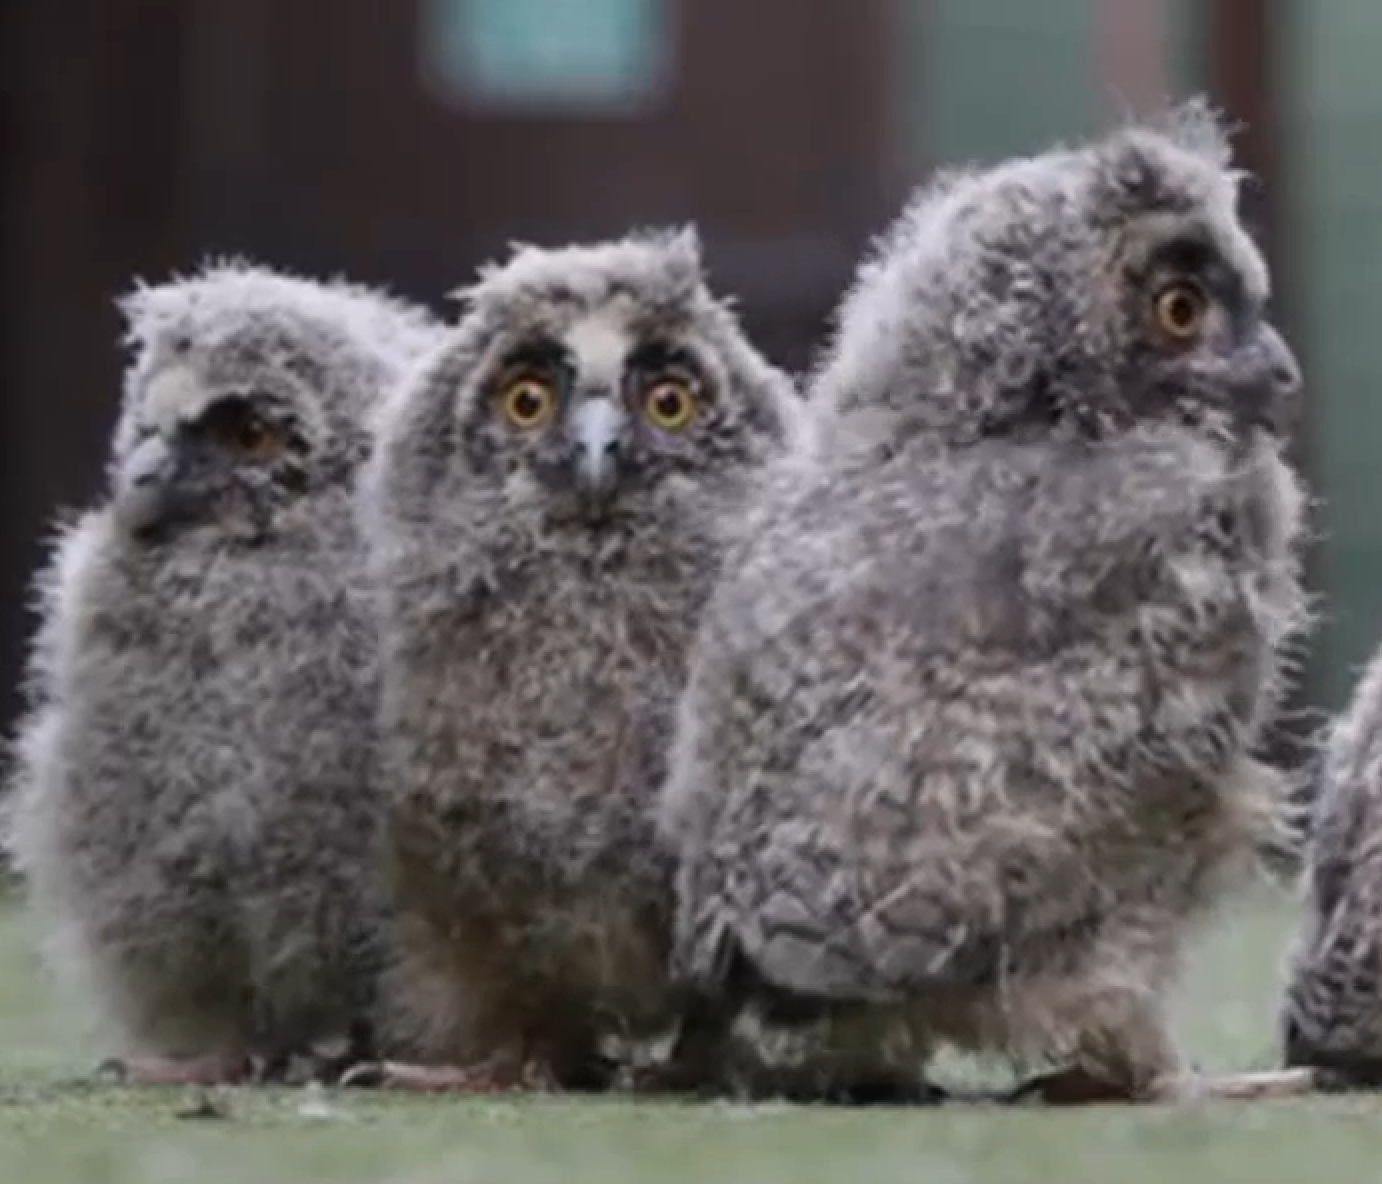 Baby owls arrive at Scottish rescue centre